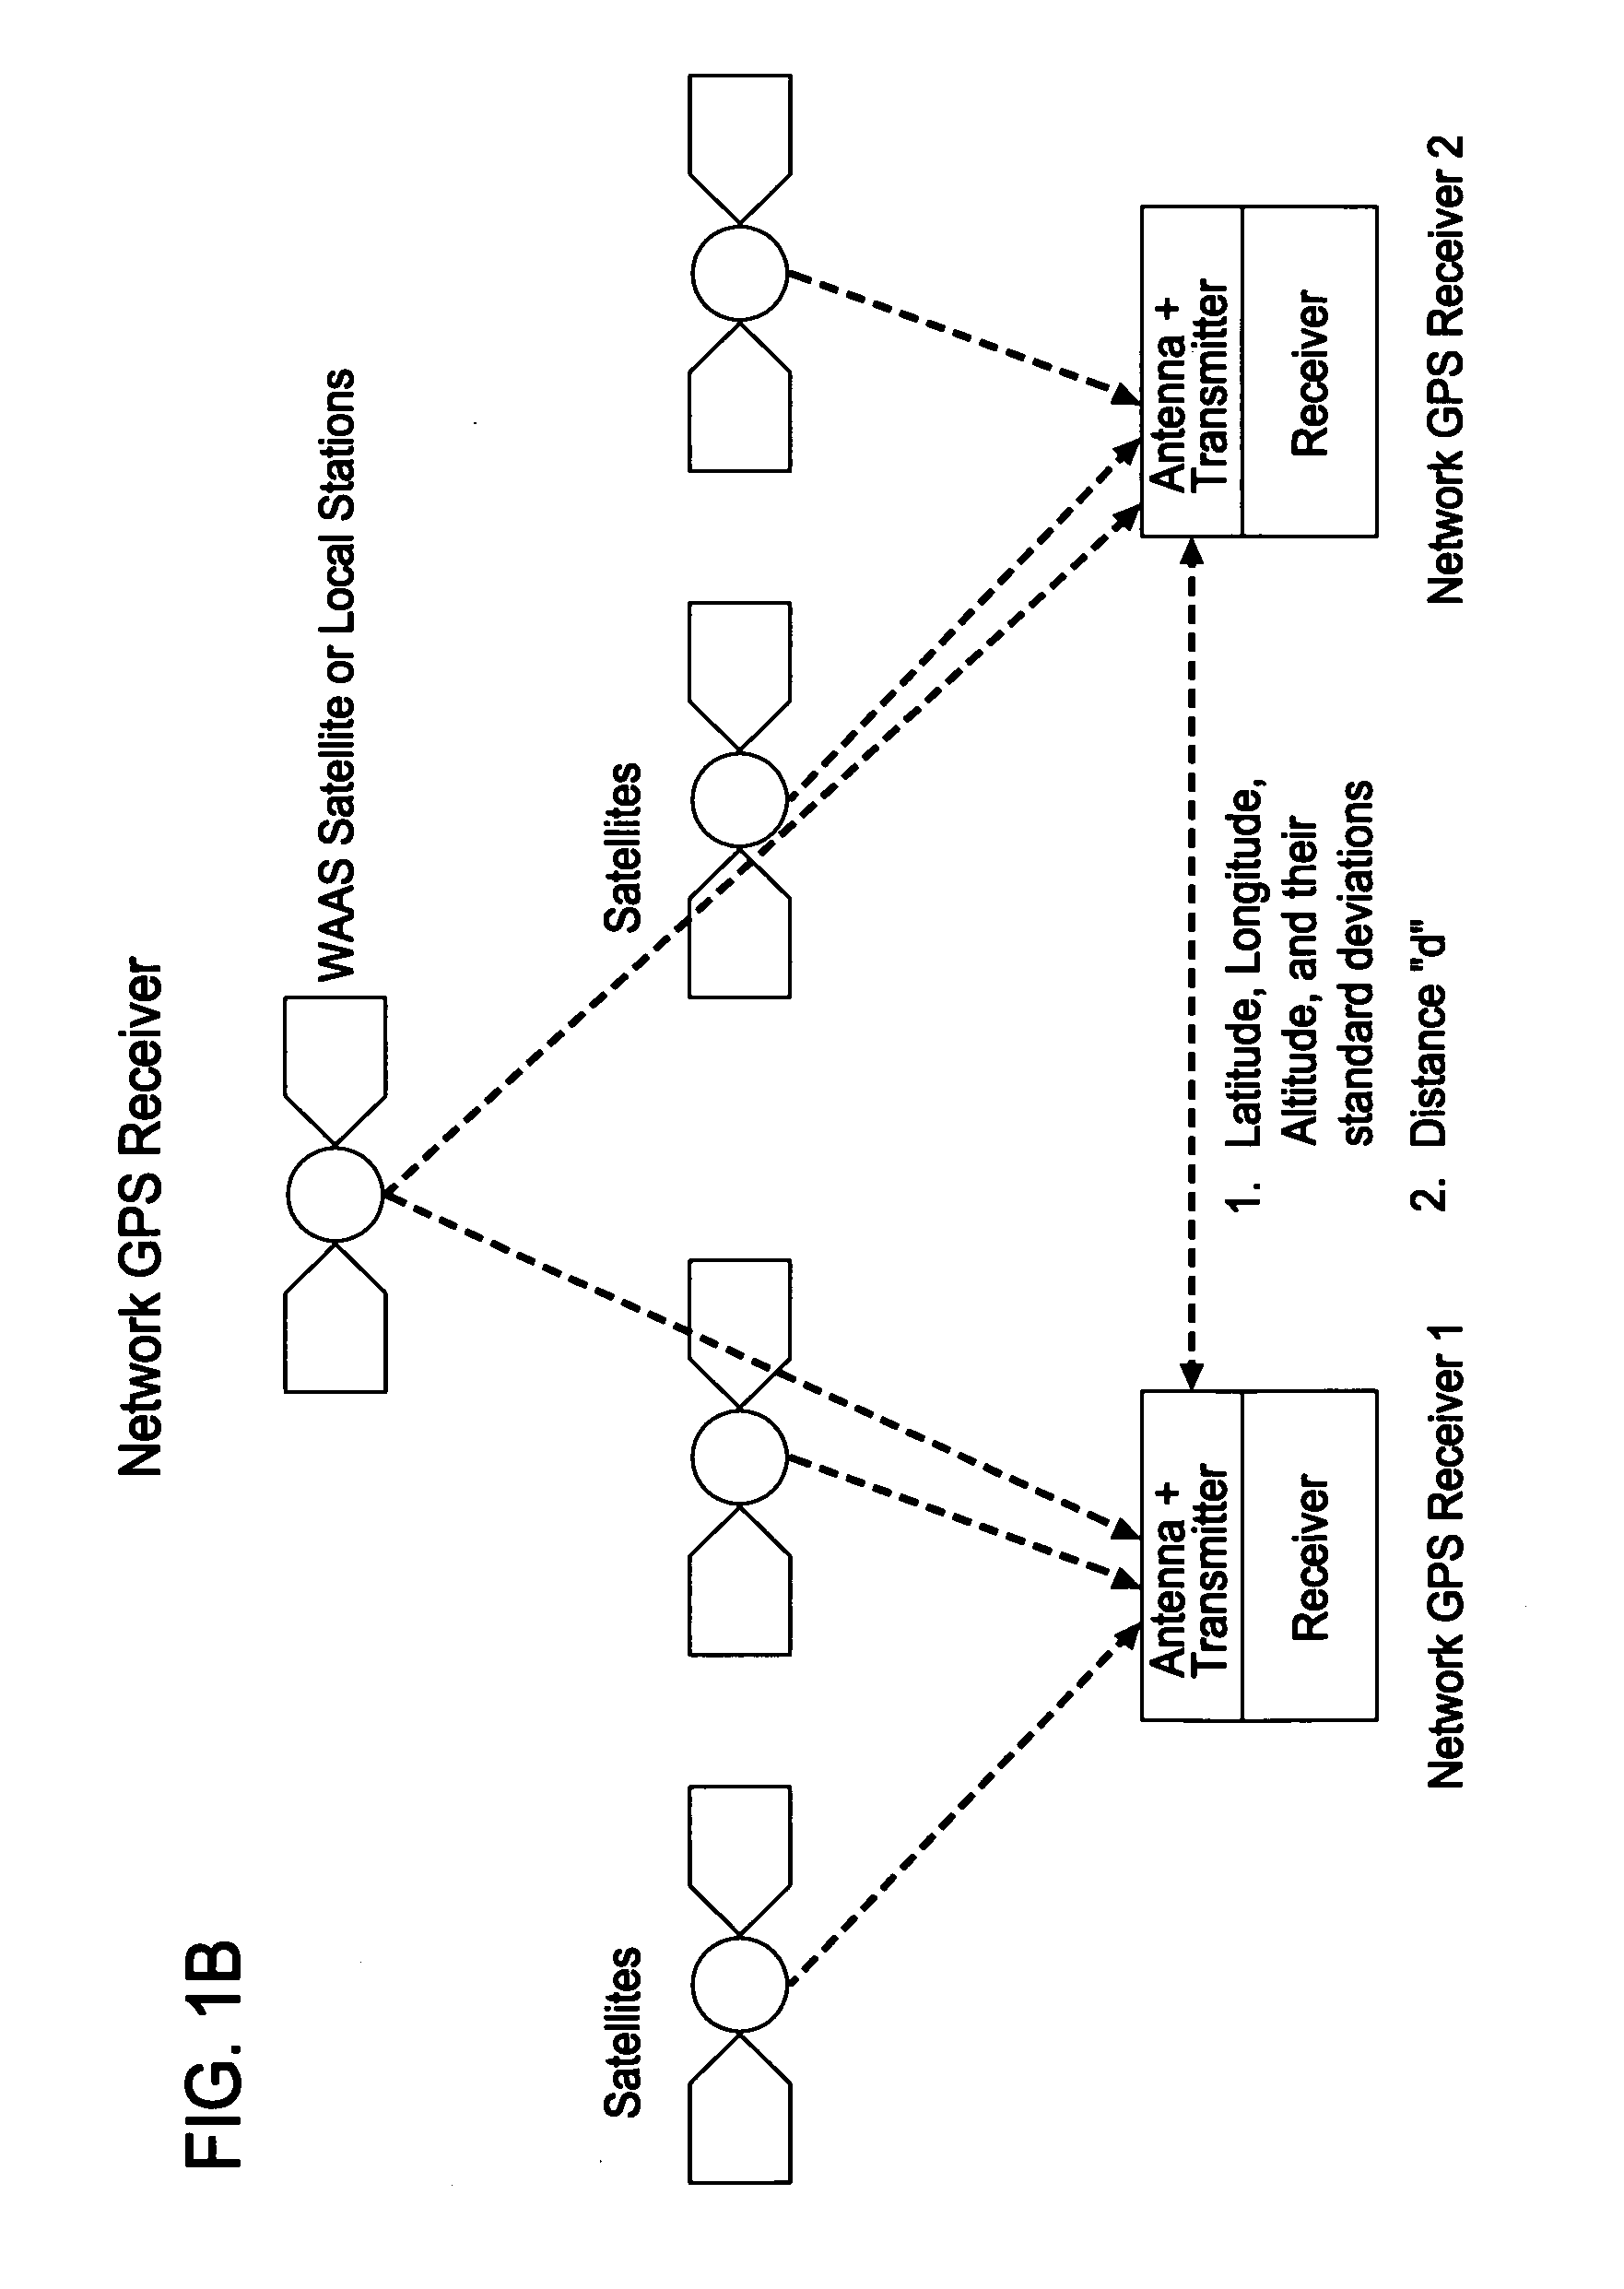 User based positioning aiding network by mobile GPS station/receiver